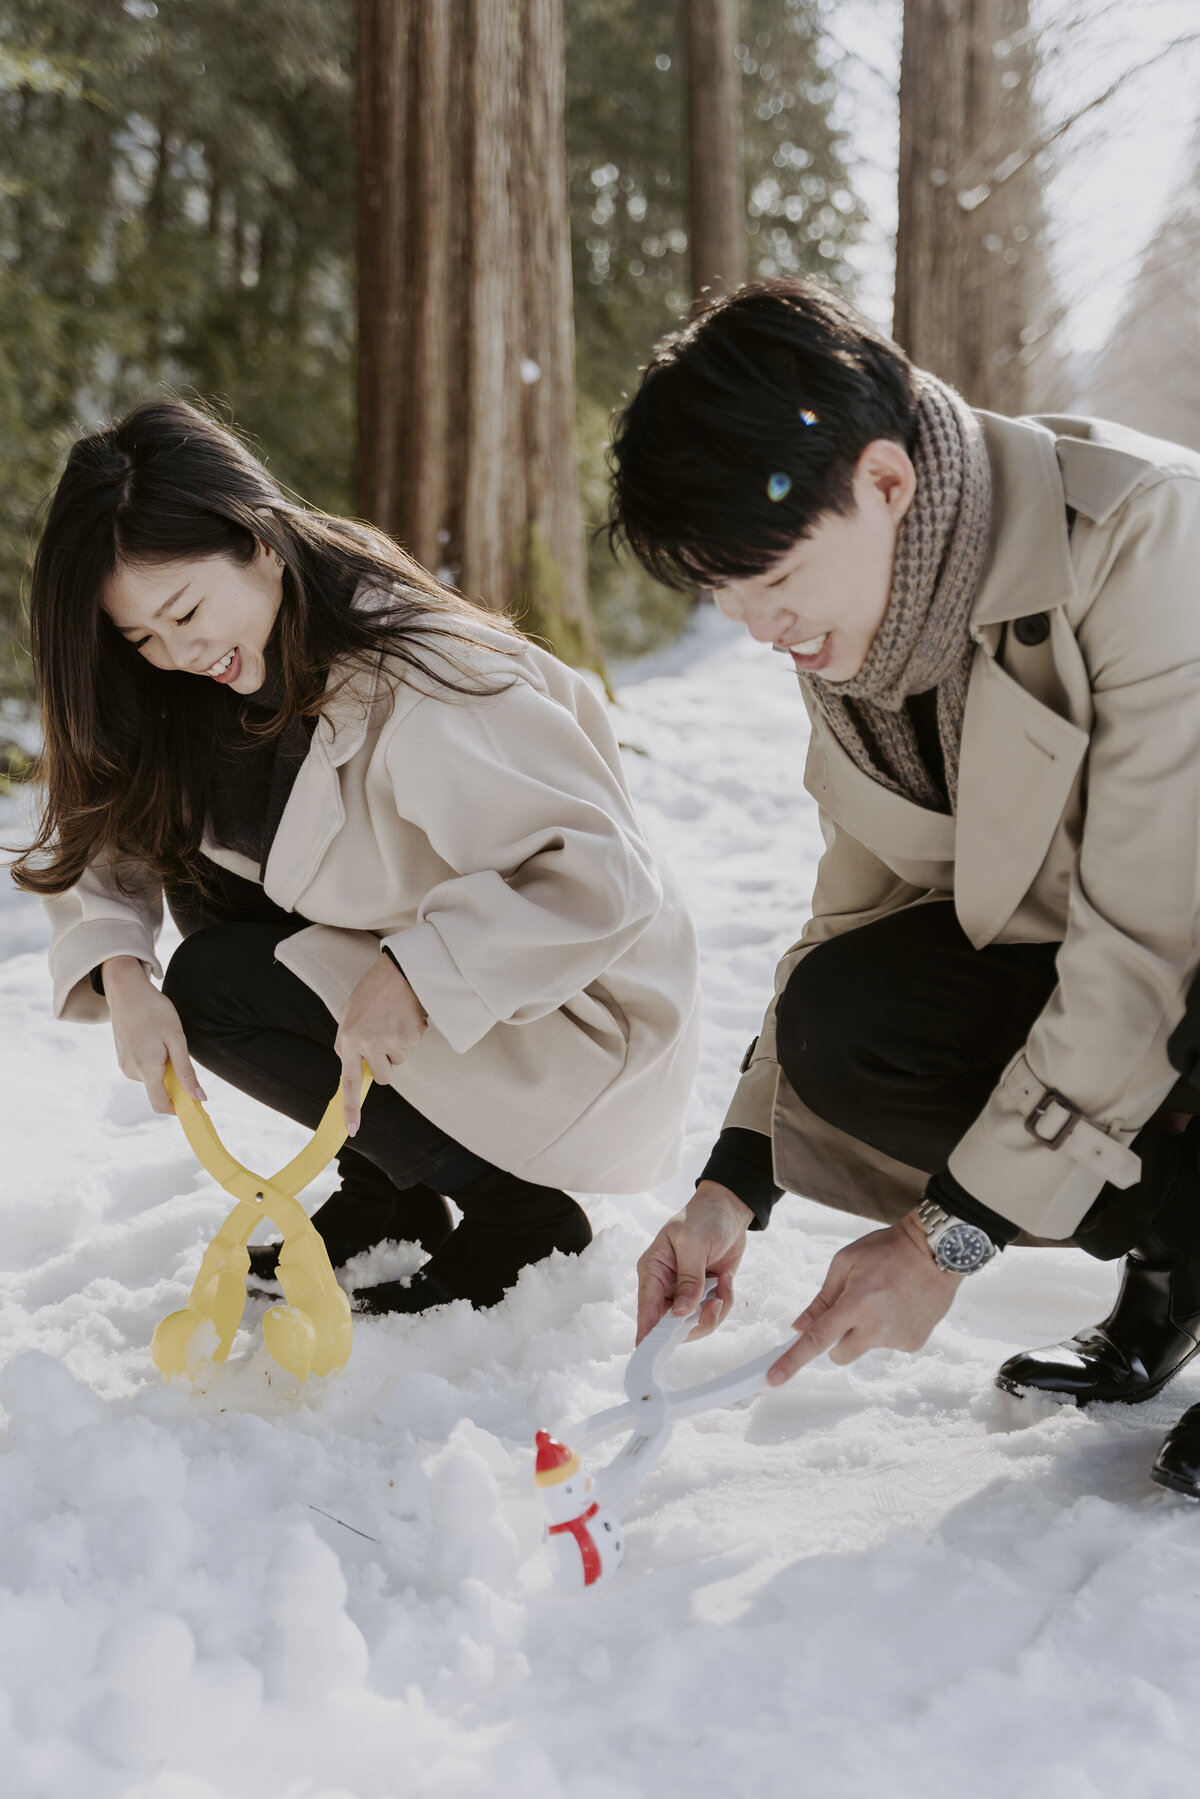 the couple playing in the snow at metasequoia road in damyang south korea